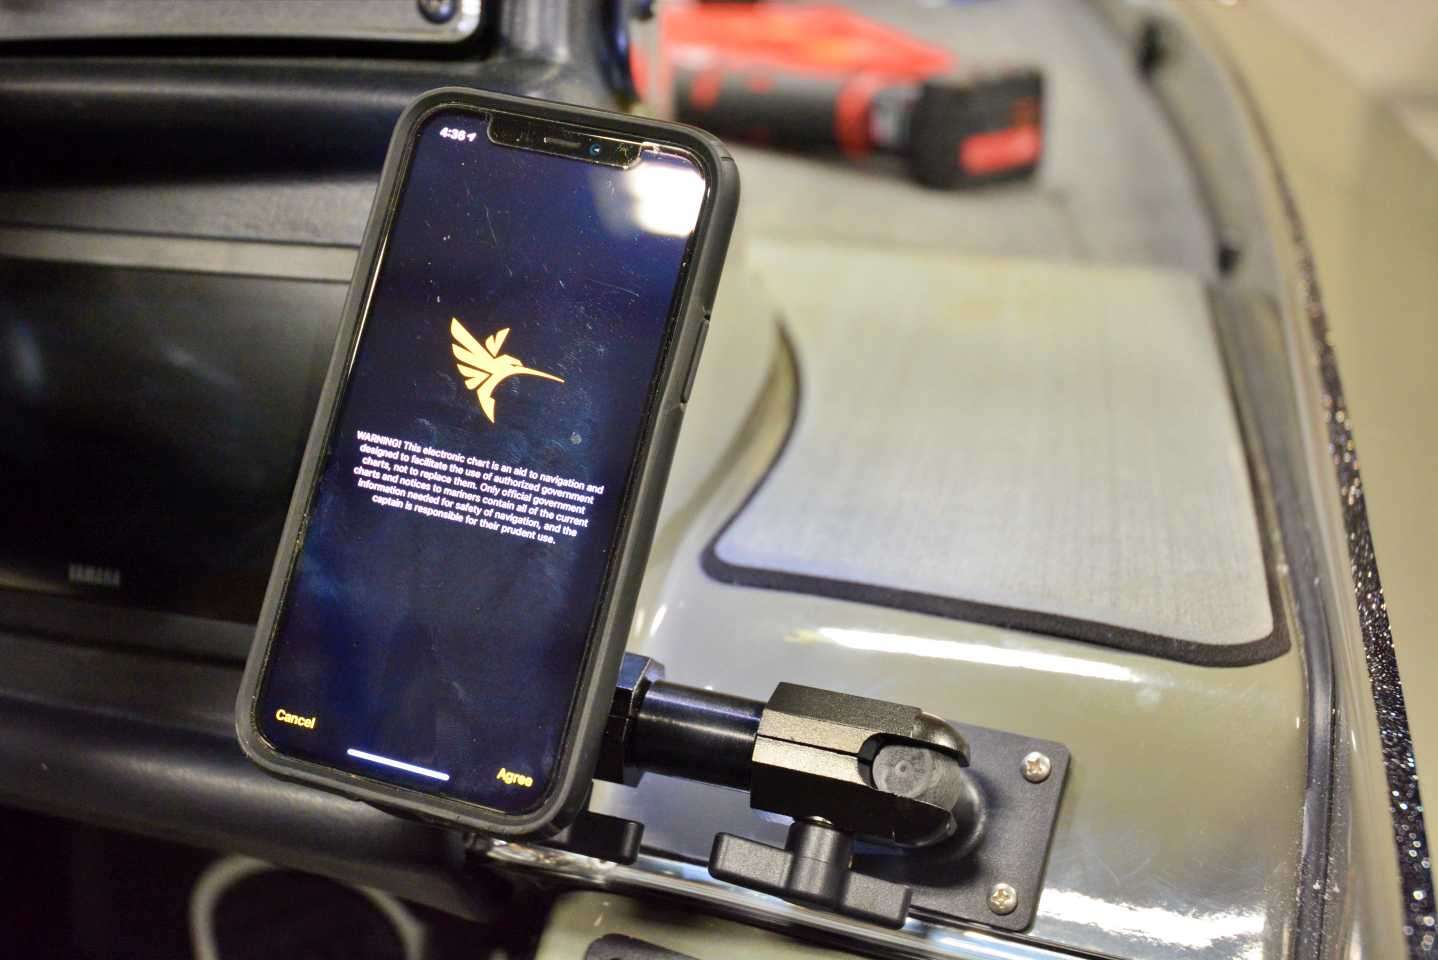 The mount provides 360-degree holding options, and thus the reason why Jocumsen uses it in his boat, truck and camper. The phone is secure even at high speeds in the boat. 
